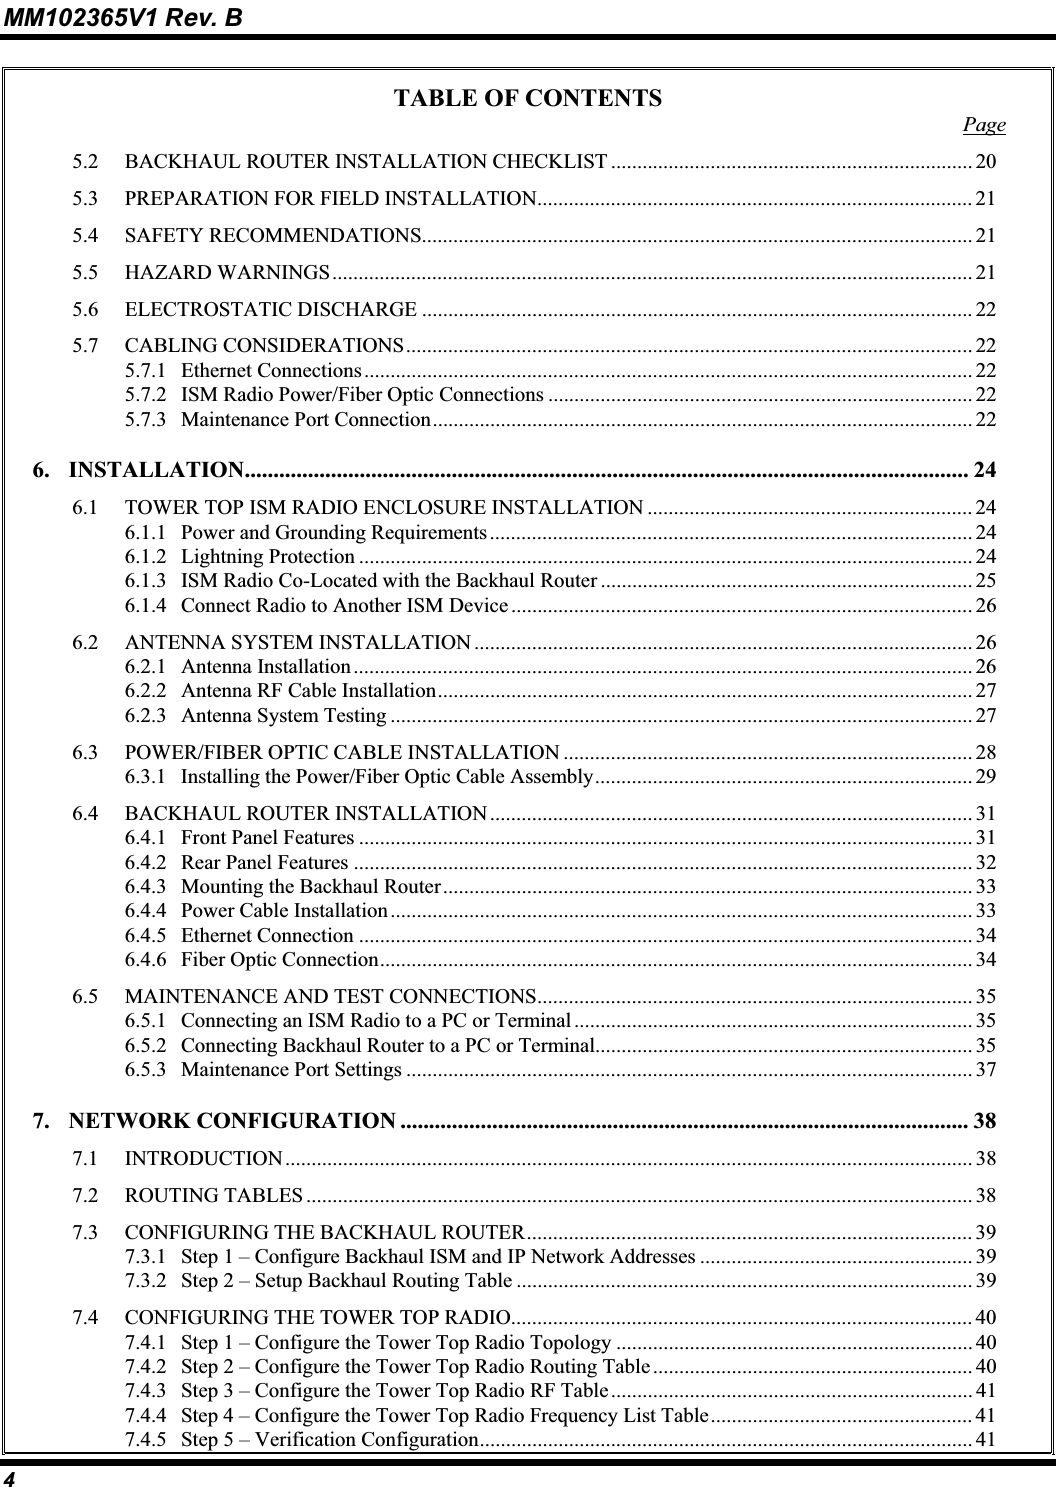 MM102365V1 Rev. B TABLE OF CONTENTS Page5.2 BACKHAUL ROUTER INSTALLATION CHECKLIST ..................................................................... 205.3 PREPARATION FOR FIELD INSTALLATION................................................................................... 215.4 SAFETY RECOMMENDATIONS......................................................................................................... 215.5 HAZARD WARNINGS.......................................................................................................................... 215.6 ELECTROSTATIC DISCHARGE ......................................................................................................... 225.7 CABLING CONSIDERATIONS............................................................................................................ 225.7.1 Ethernet Connections.................................................................................................................... 225.7.2 ISM Radio Power/Fiber Optic Connections ................................................................................. 225.7.3 Maintenance Port Connection....................................................................................................... 226. INSTALLATION.............................................................................................................................. 246.1 TOWER TOP ISM RADIO ENCLOSURE INSTALLATION .............................................................. 246.1.1 Power and Grounding Requirements............................................................................................ 246.1.2 Lightning Protection ..................................................................................................................... 246.1.3 ISM Radio Co-Located with the Backhaul Router ....................................................................... 256.1.4 Connect Radio to Another ISM Device ........................................................................................266.2 ANTENNA SYSTEM INSTALLATION ............................................................................................... 266.2.1 Antenna Installation...................................................................................................................... 266.2.2 Antenna RF Cable Installation...................................................................................................... 276.2.3 Antenna System Testing ............................................................................................................... 276.3 POWER/FIBER OPTIC CABLE INSTALLATION .............................................................................. 286.3.1 Installing the Power/Fiber Optic Cable Assembly........................................................................ 296.4 BACKHAUL ROUTER INSTALLATION ............................................................................................ 316.4.1 Front Panel Features ..................................................................................................................... 316.4.2 Rear Panel Features ...................................................................................................................... 326.4.3 Mounting the Backhaul Router..................................................................................................... 336.4.4 Power Cable Installation ............................................................................................................... 336.4.5 Ethernet Connection ..................................................................................................................... 346.4.6 Fiber Optic Connection................................................................................................................. 346.5 MAINTENANCE AND TEST CONNECTIONS................................................................................... 356.5.1 Connecting an ISM Radio to a PC or Terminal ............................................................................ 356.5.2 Connecting Backhaul Router to a PC or Terminal........................................................................ 356.5.3 Maintenance Port Settings ............................................................................................................ 377. NETWORK CONFIGURATION ................................................................................................... 387.1 INTRODUCTION................................................................................................................................... 387.2 ROUTING TABLES ............................................................................................................................... 387.3 CONFIGURING THE BACKHAUL ROUTER..................................................................................... 397.3.1 Step 1 – Configure Backhaul ISM and IP Network Addresses .................................................... 397.3.2 Step 2 – Setup Backhaul Routing Table ....................................................................................... 397.4 CONFIGURING THE TOWER TOP RADIO........................................................................................ 407.4.1 Step 1 – Configure the Tower Top Radio Topology .................................................................... 407.4.2 Step 2 – Configure the Tower Top Radio Routing Table............................................................. 407.4.3 Step 3 – Configure the Tower Top Radio RF Table..................................................................... 417.4.4 Step 4 – Configure the Tower Top Radio Frequency List Table.................................................. 417.4.5 Step 5 – Verification Configuration.............................................................................................. 414